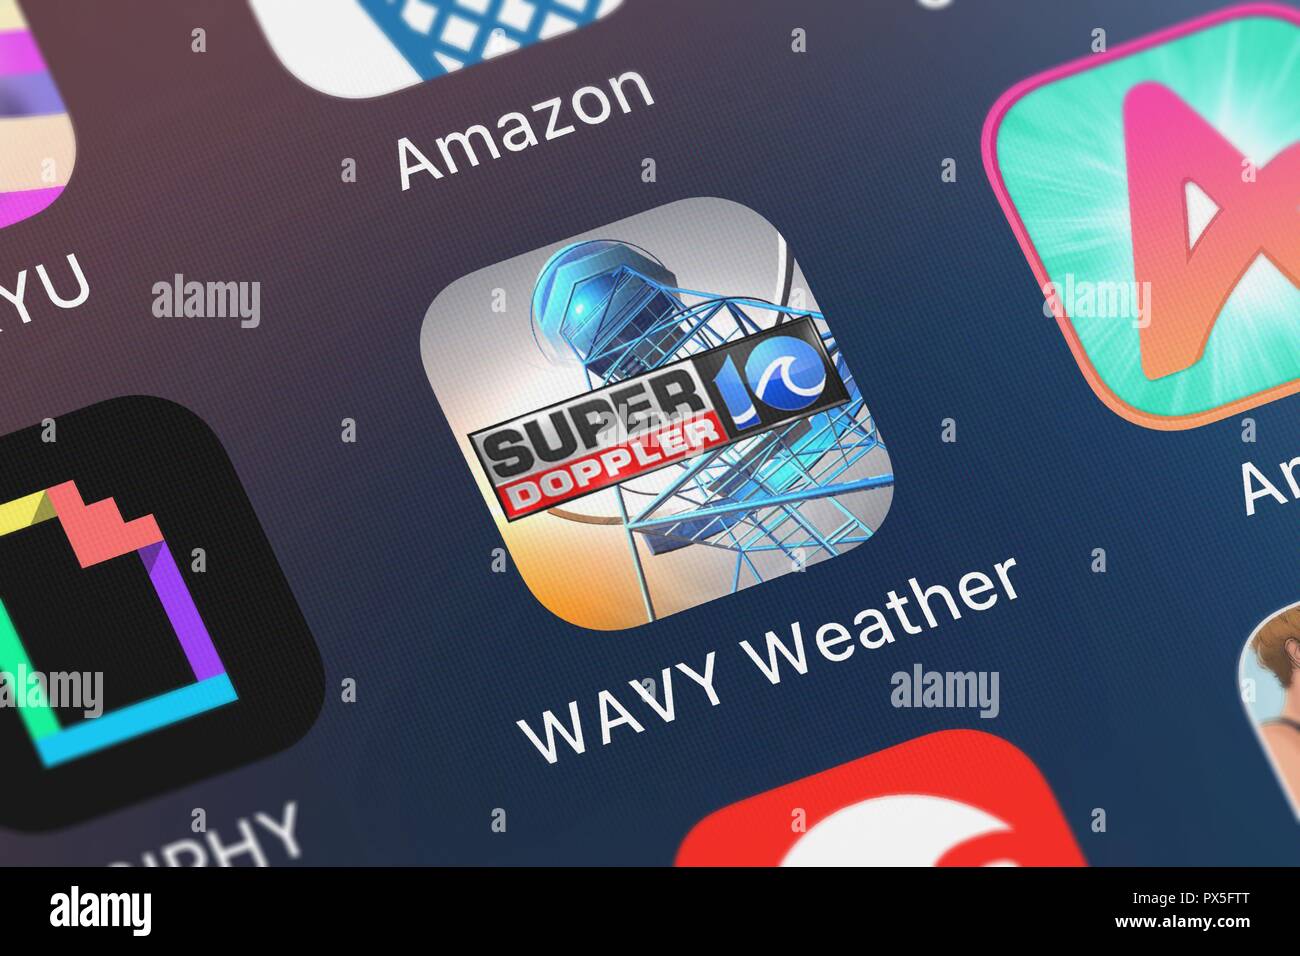 London, United Kingdom - October 19, 2018: Screenshot of LIN Television Corporation's mobile app WAVY Weather. Stock Photo